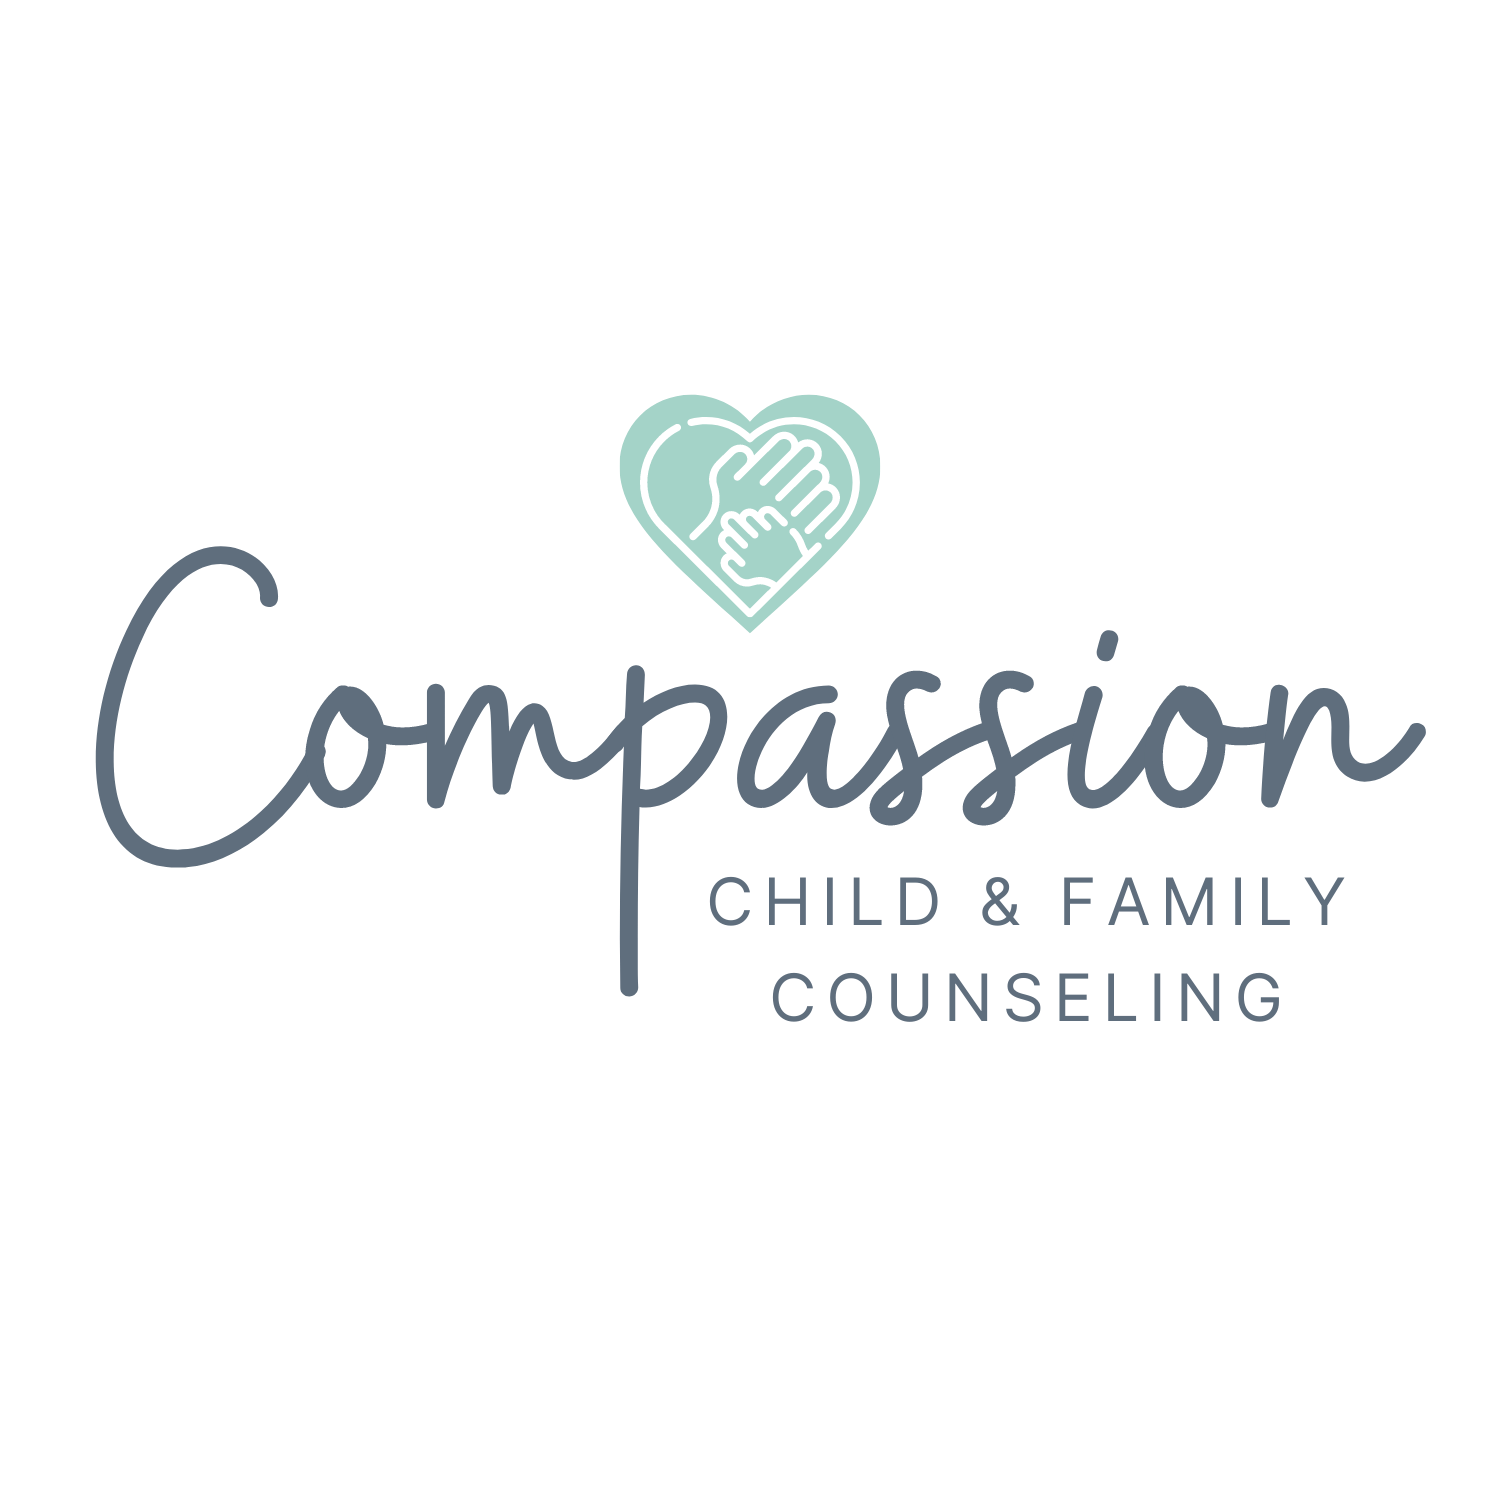 Compassion Child & Family Counseling Logo